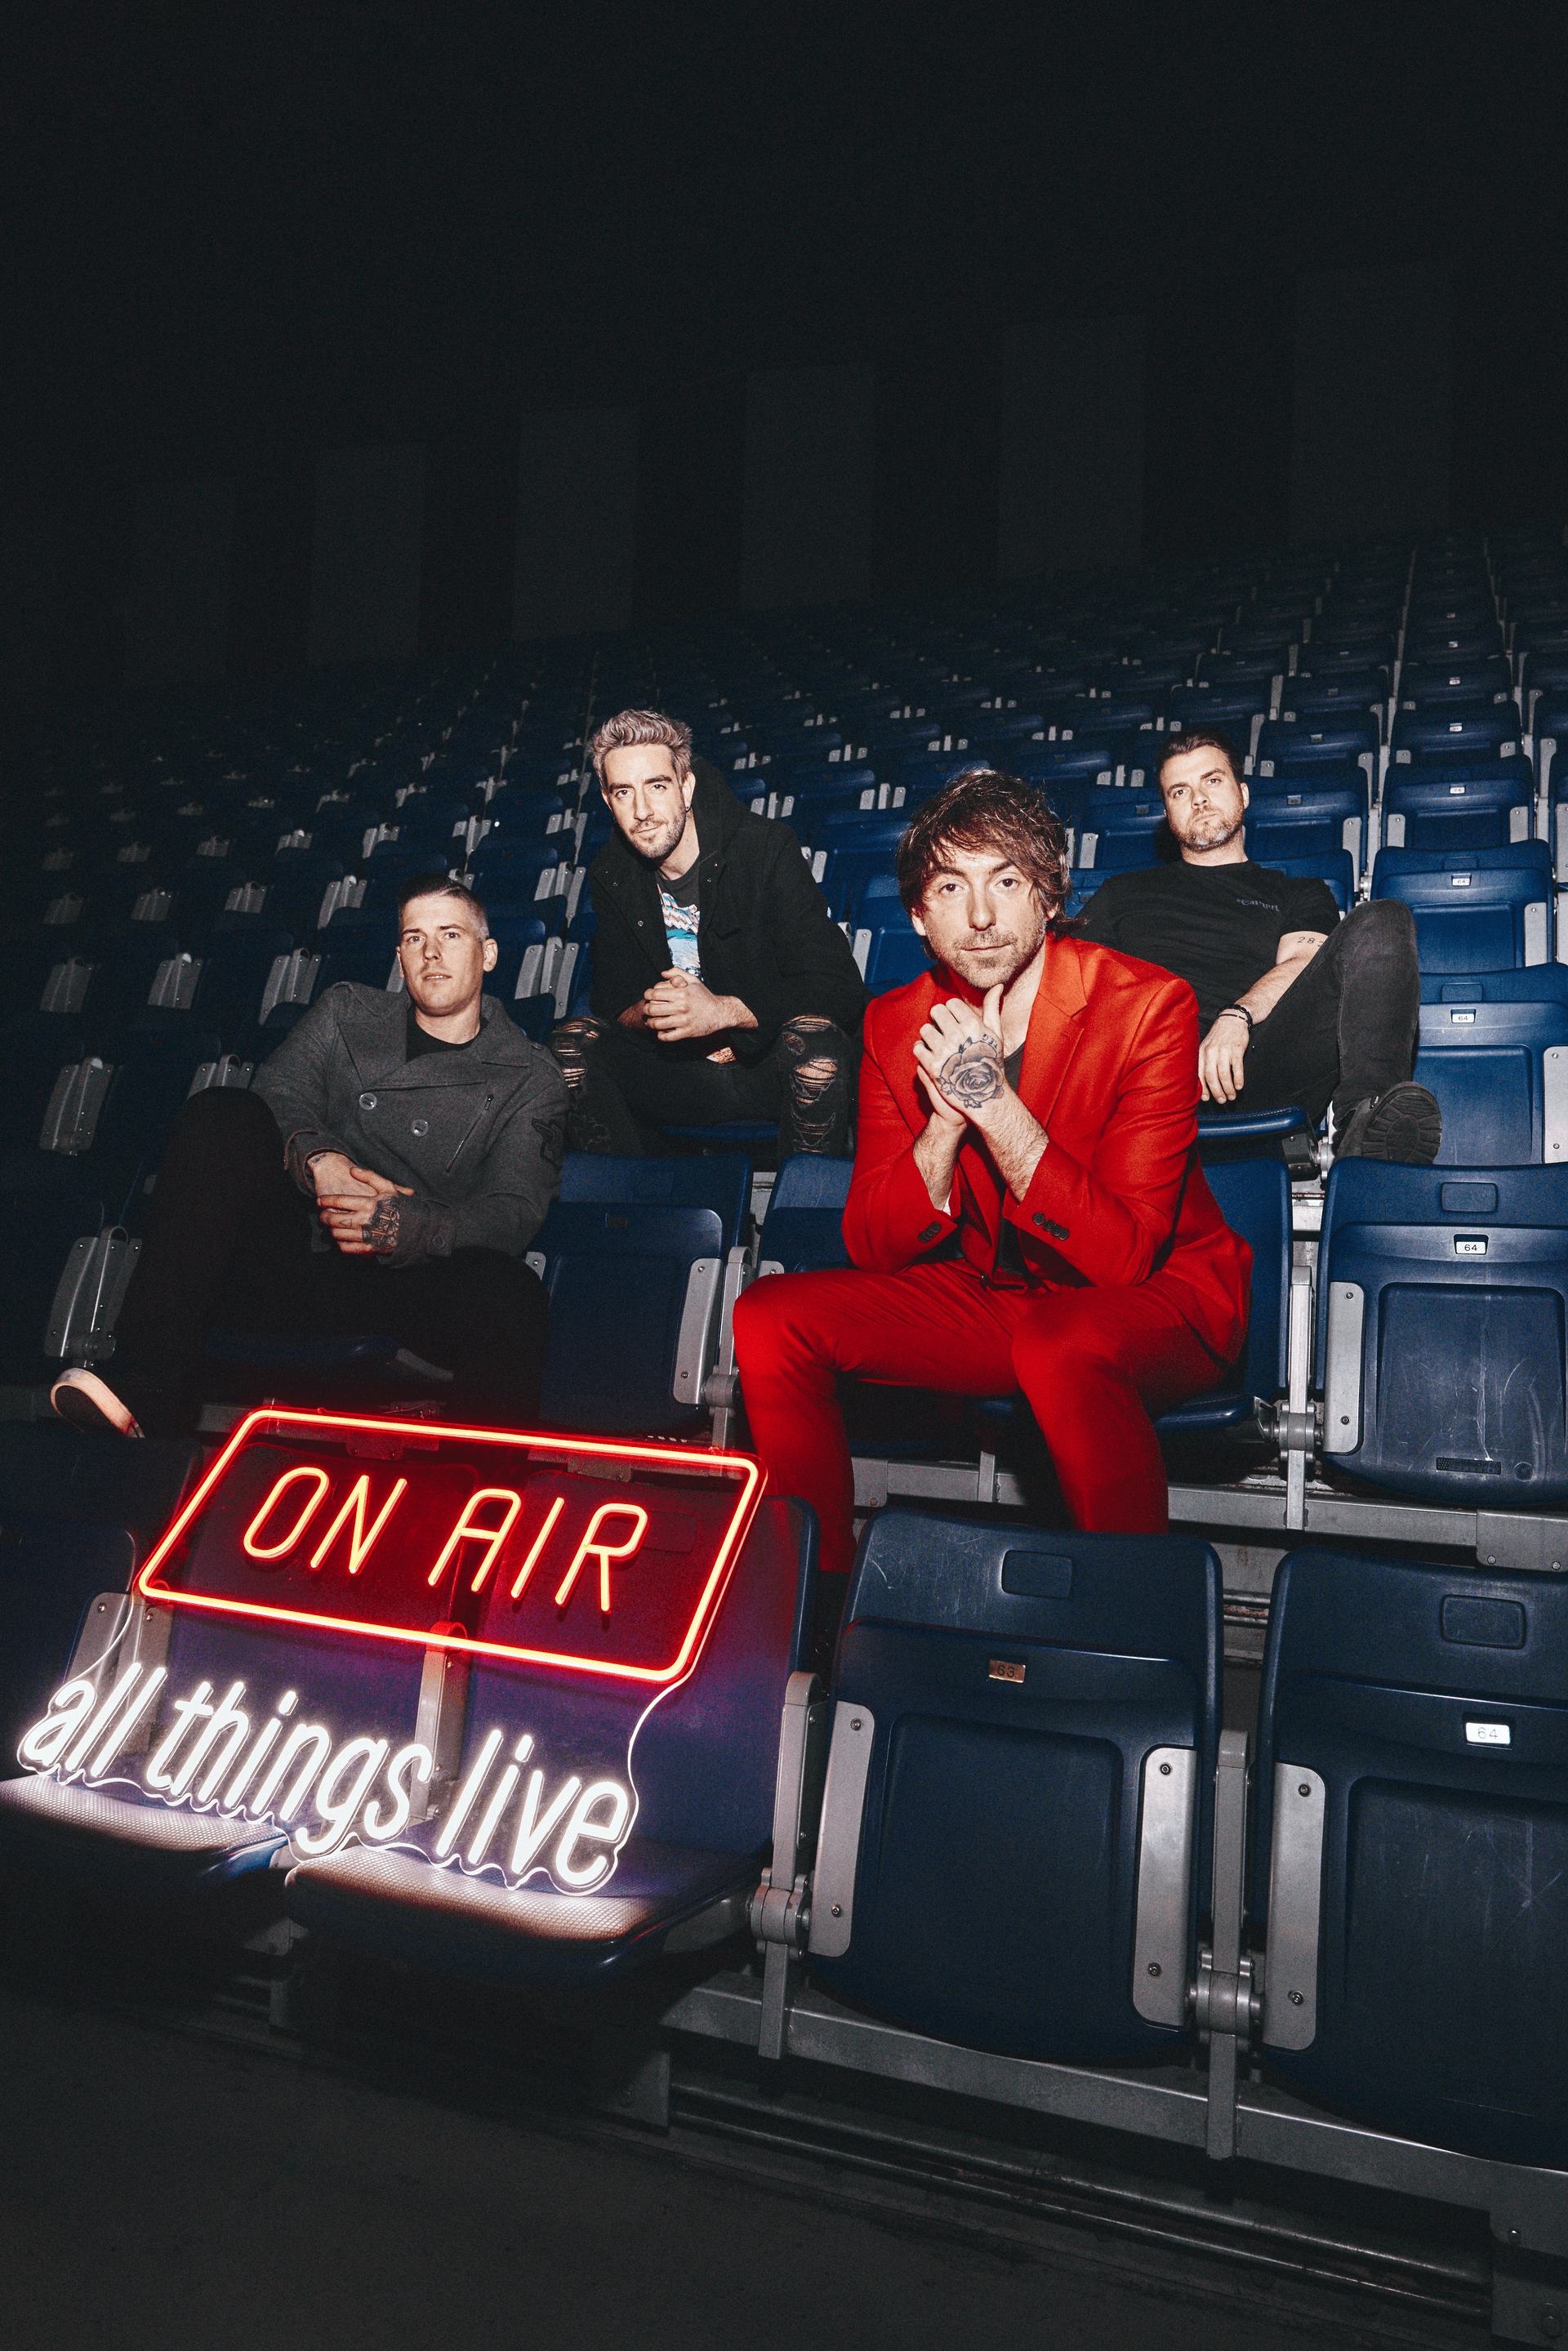 All Time Low sat in front of the On Air neon sign at OVO Arena Wembley in March 2023